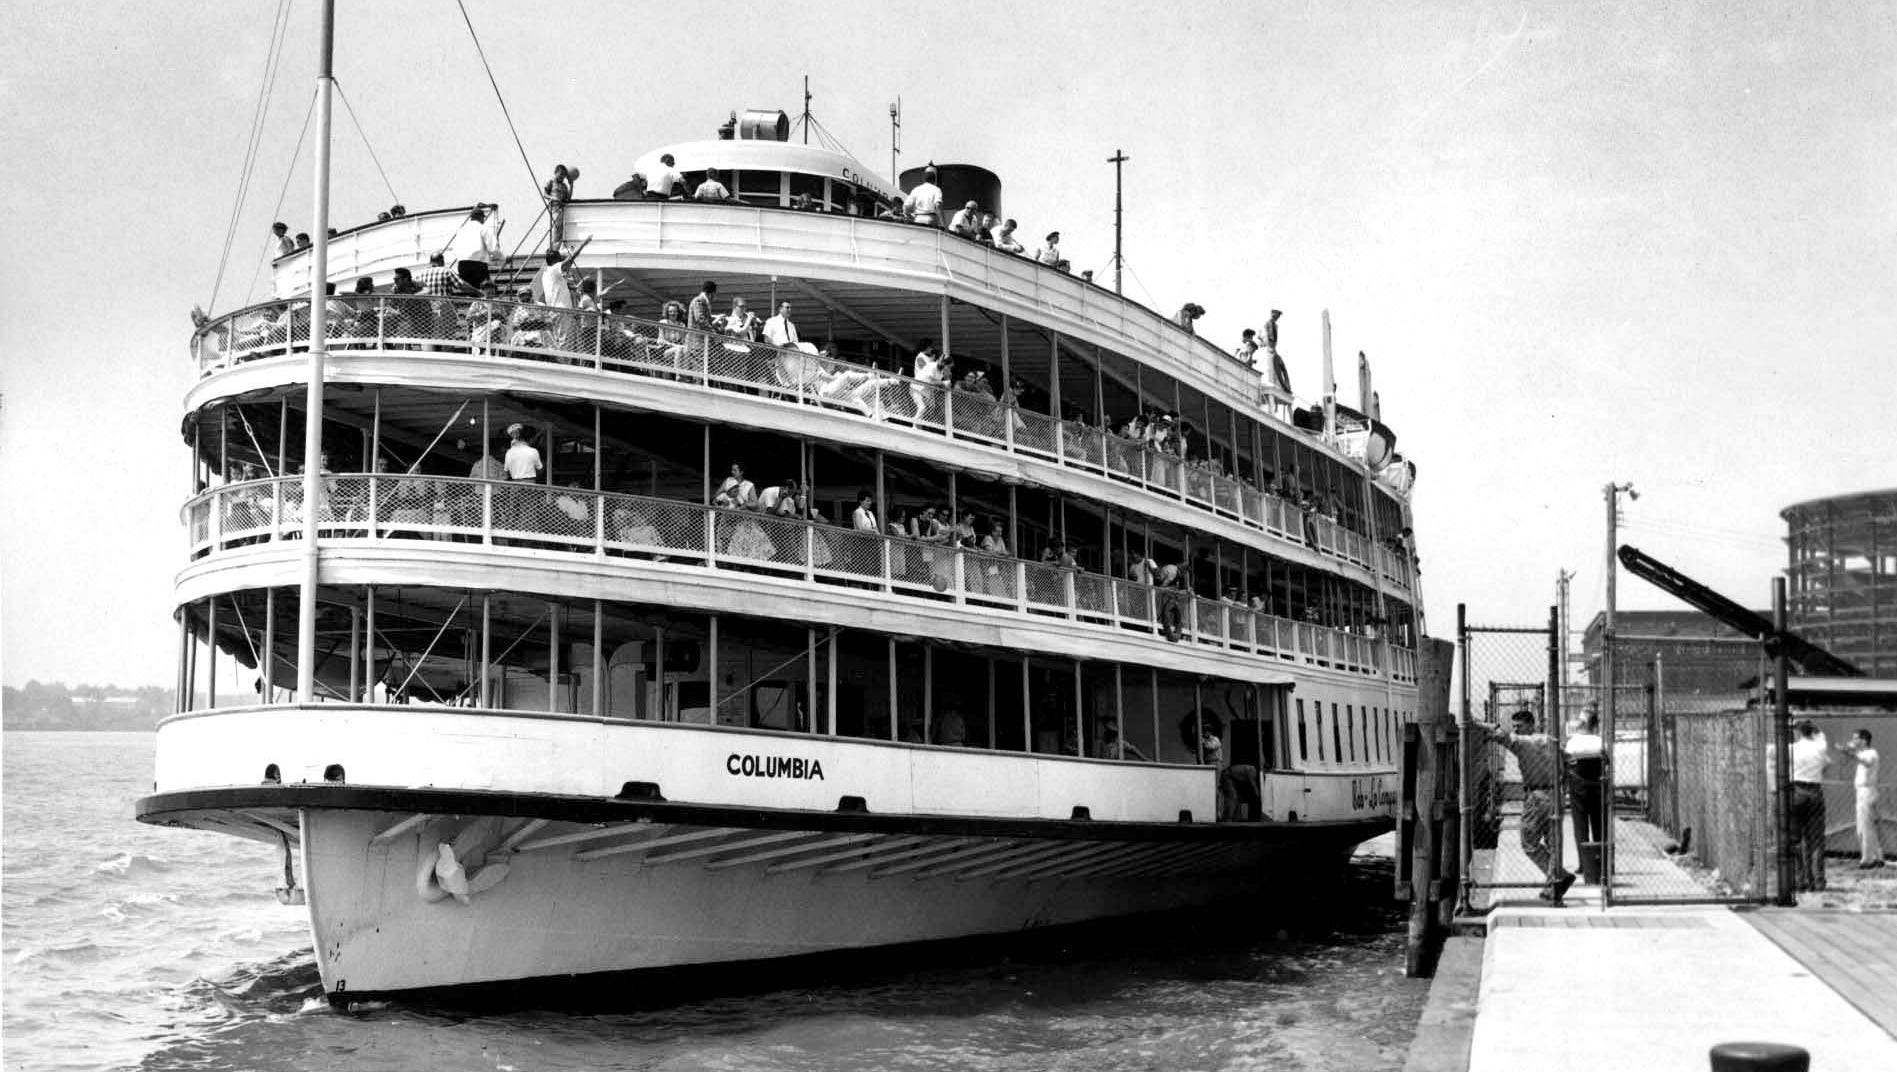 The Boblo boat Columbia docks in this undated photo.